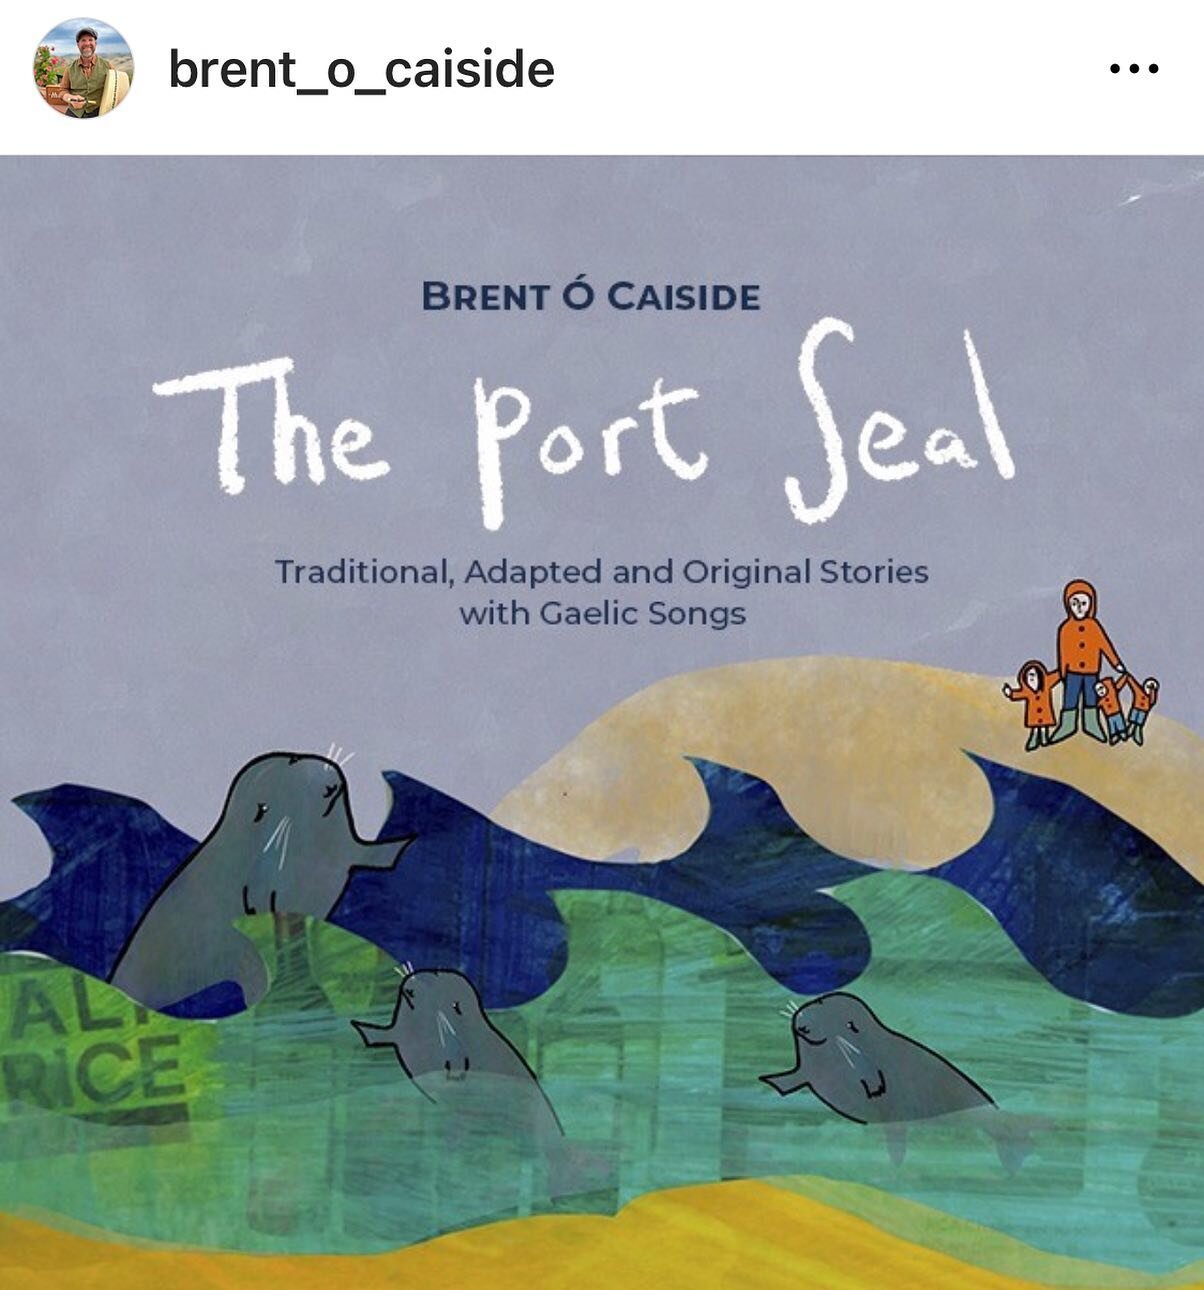 A delight of a project created by @brent_o_caiside and illustrated/animated by me #projectgala x keep an eye on the @indiegogo project coming soon ❤️

#folktales #theportseal #storytelling #illustration x